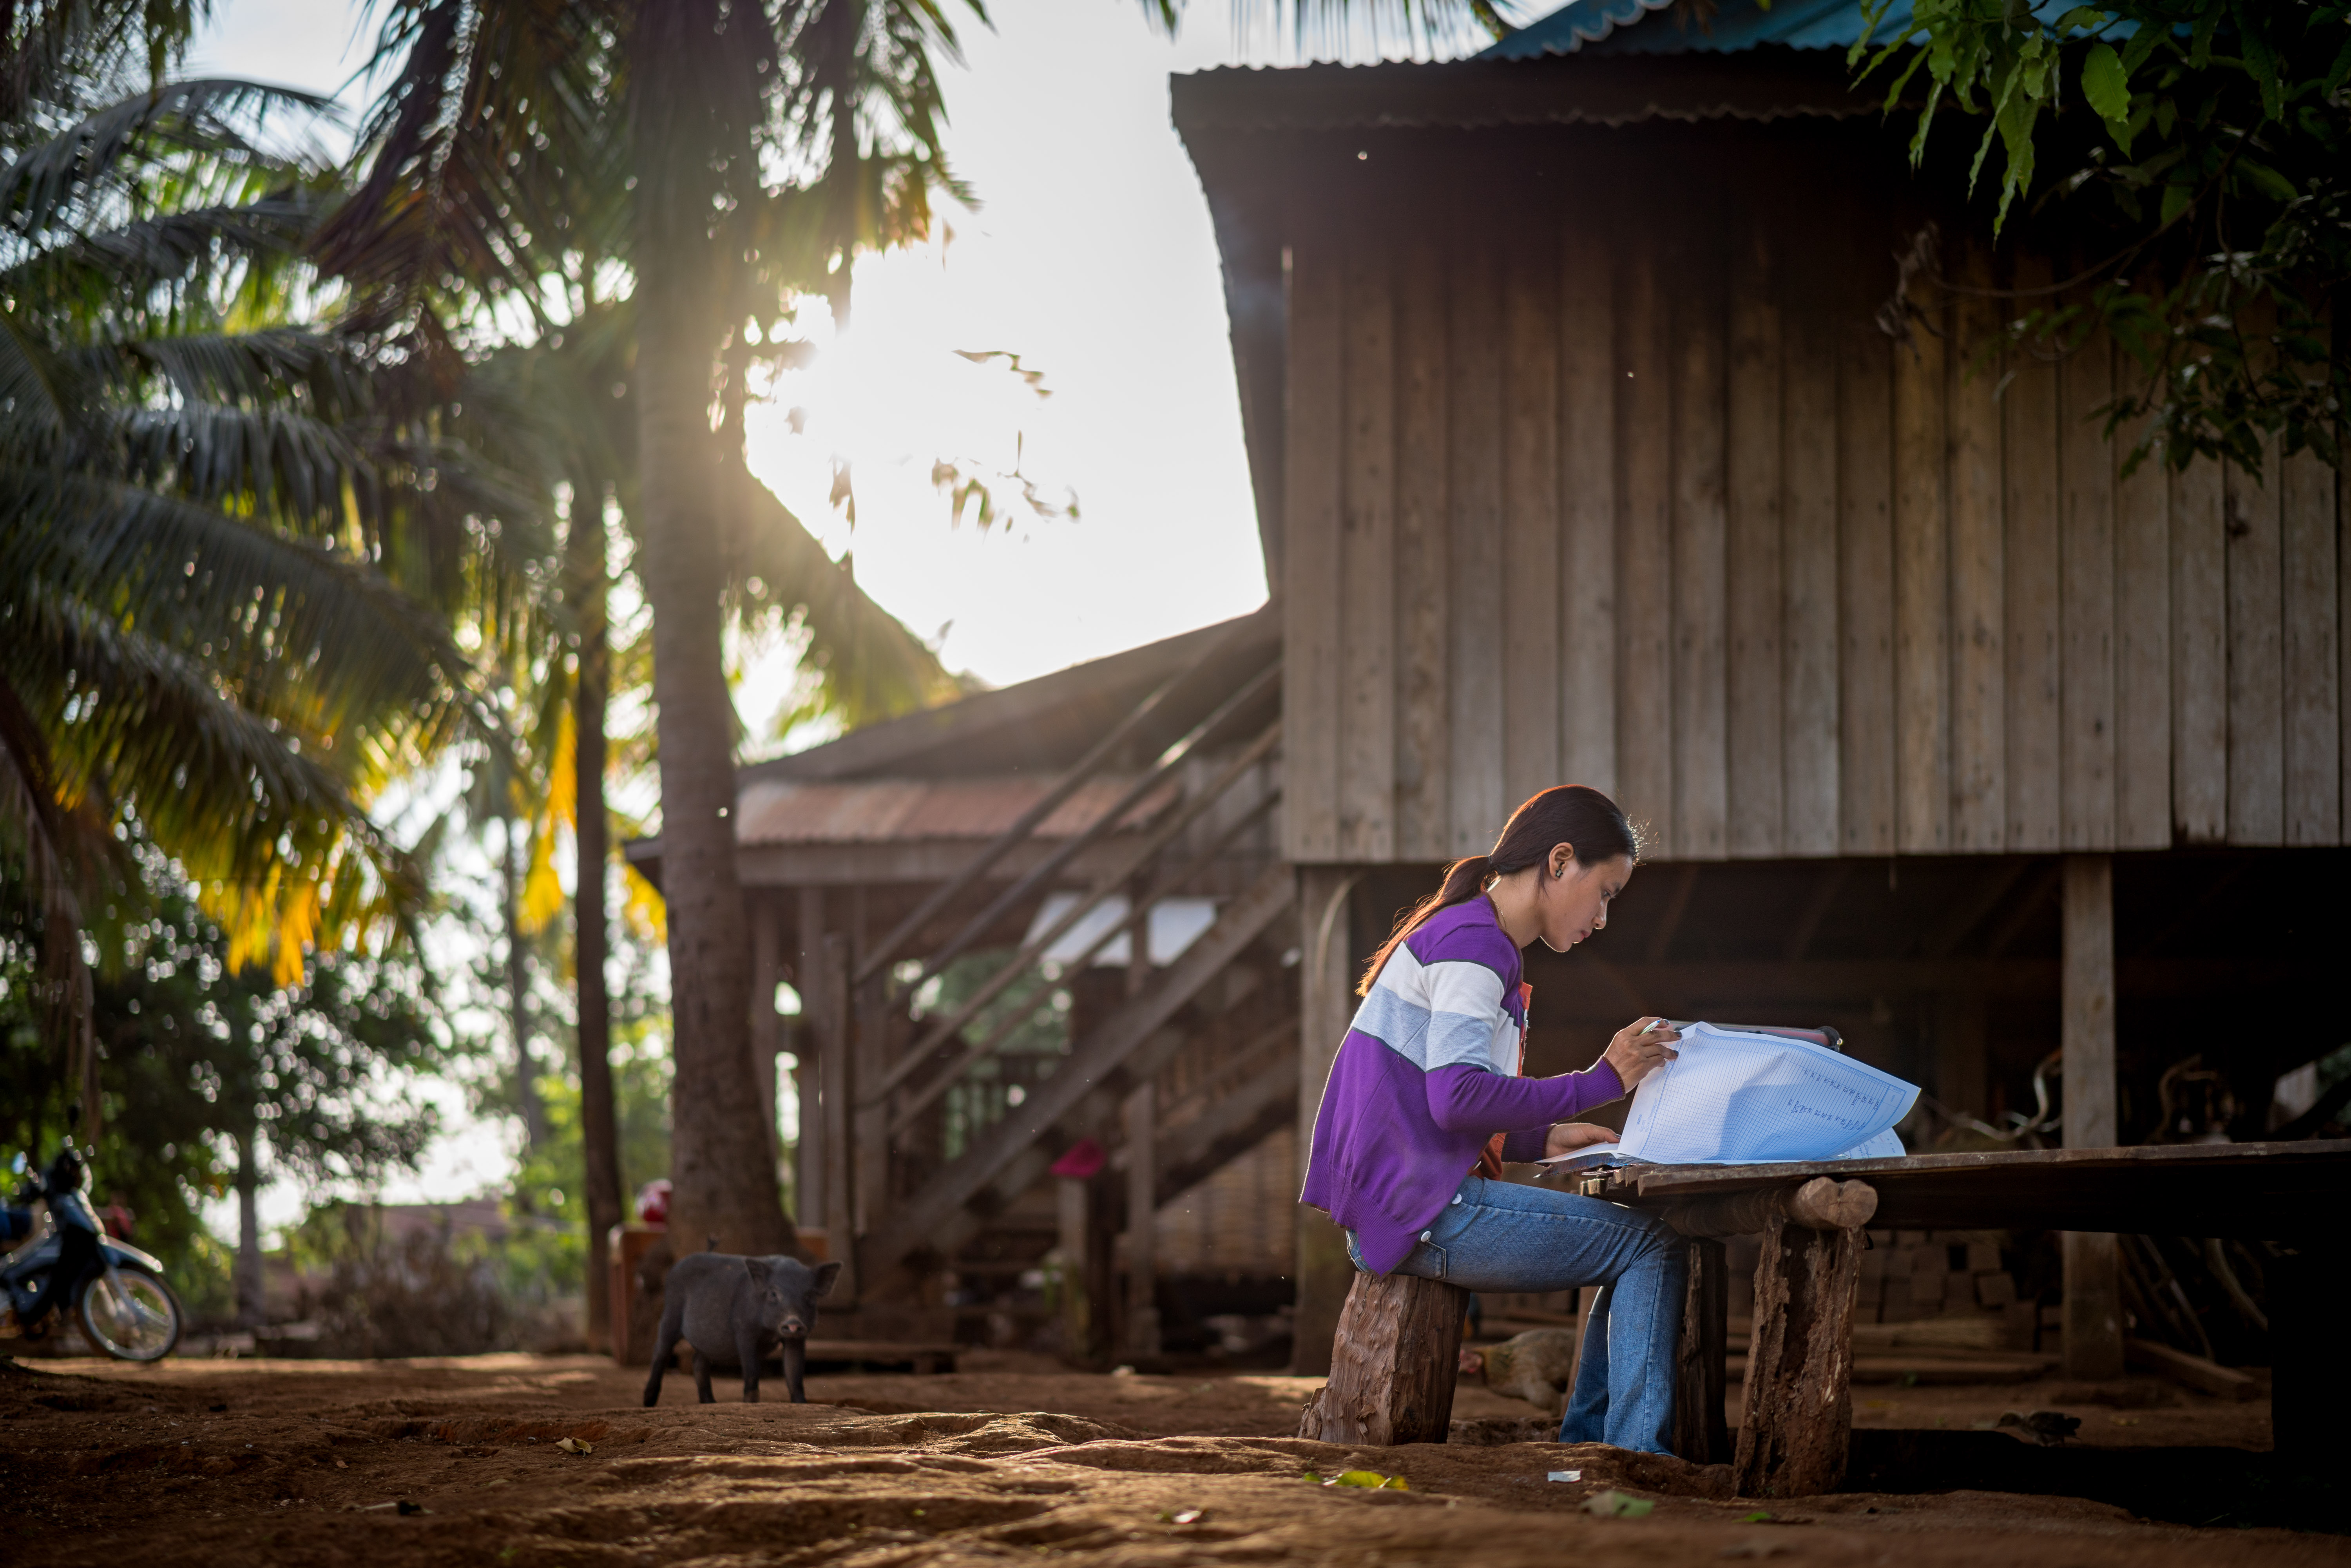 15 November 2018, Poy commune, Ochum district, Ratanakiri province, Cambodia. After working on the farm with her family, Chea Lach heads home and does her marking for the day before it gets too dark.